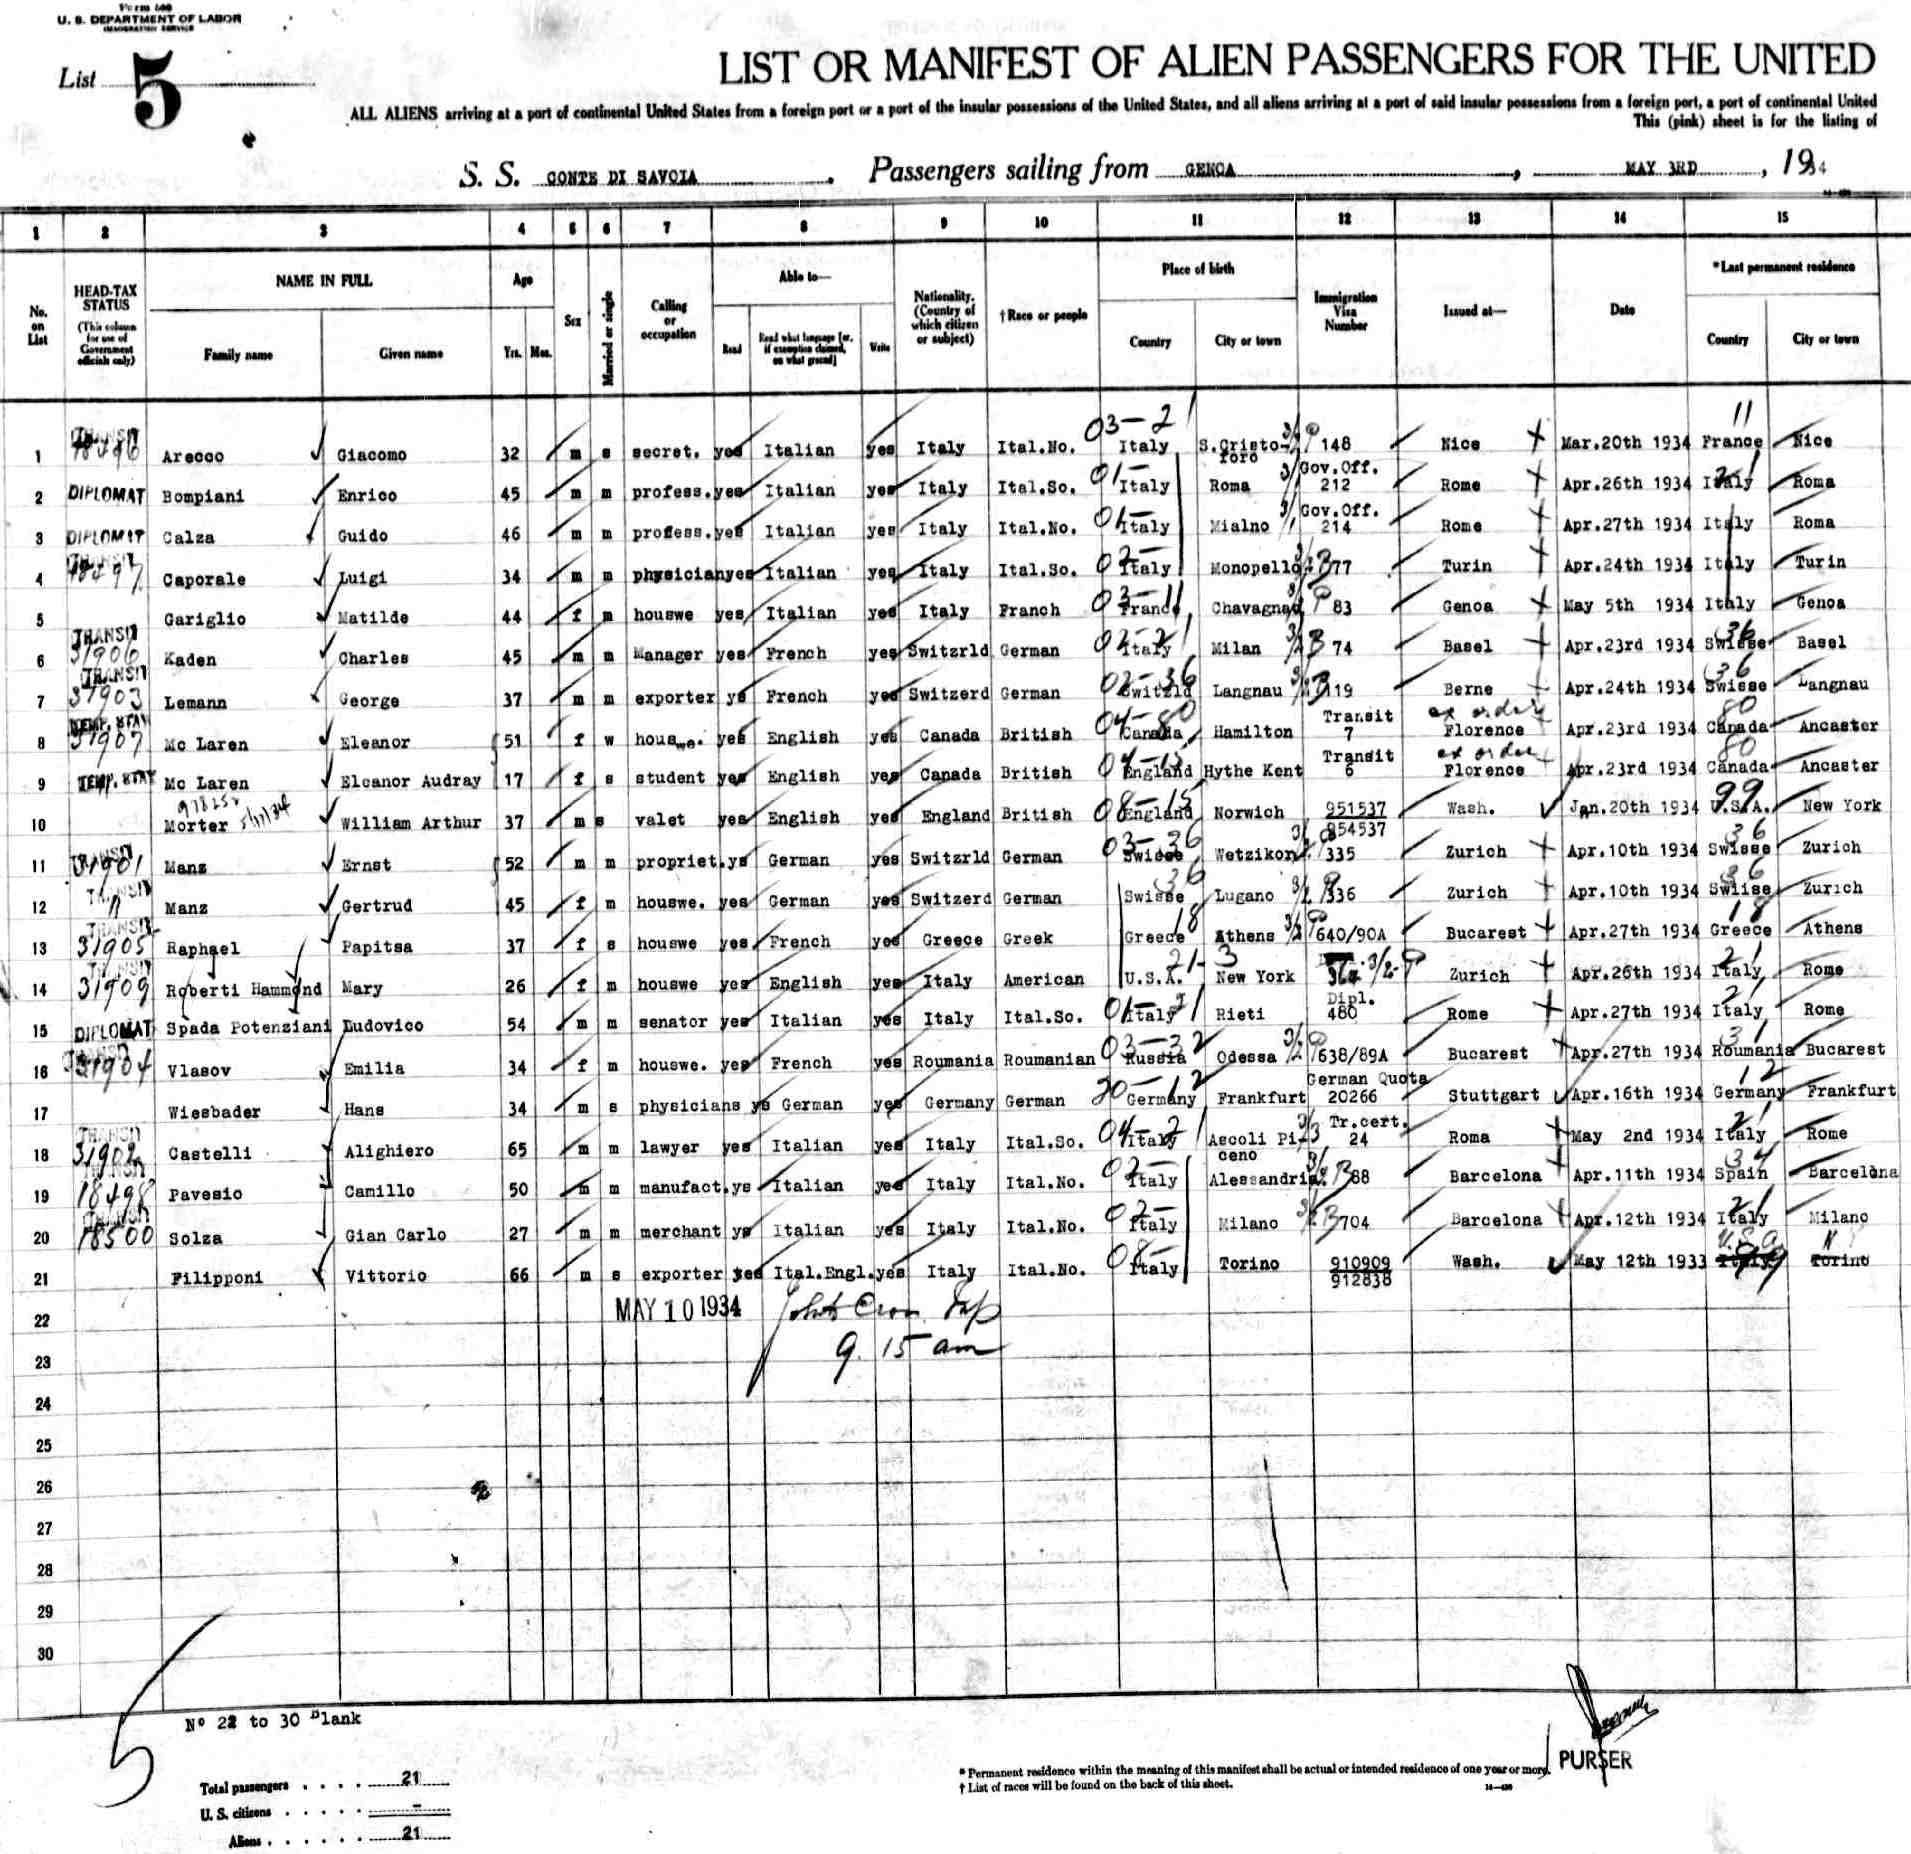 travel record - audrey babs mclaren - italy to us - may1934.jpg